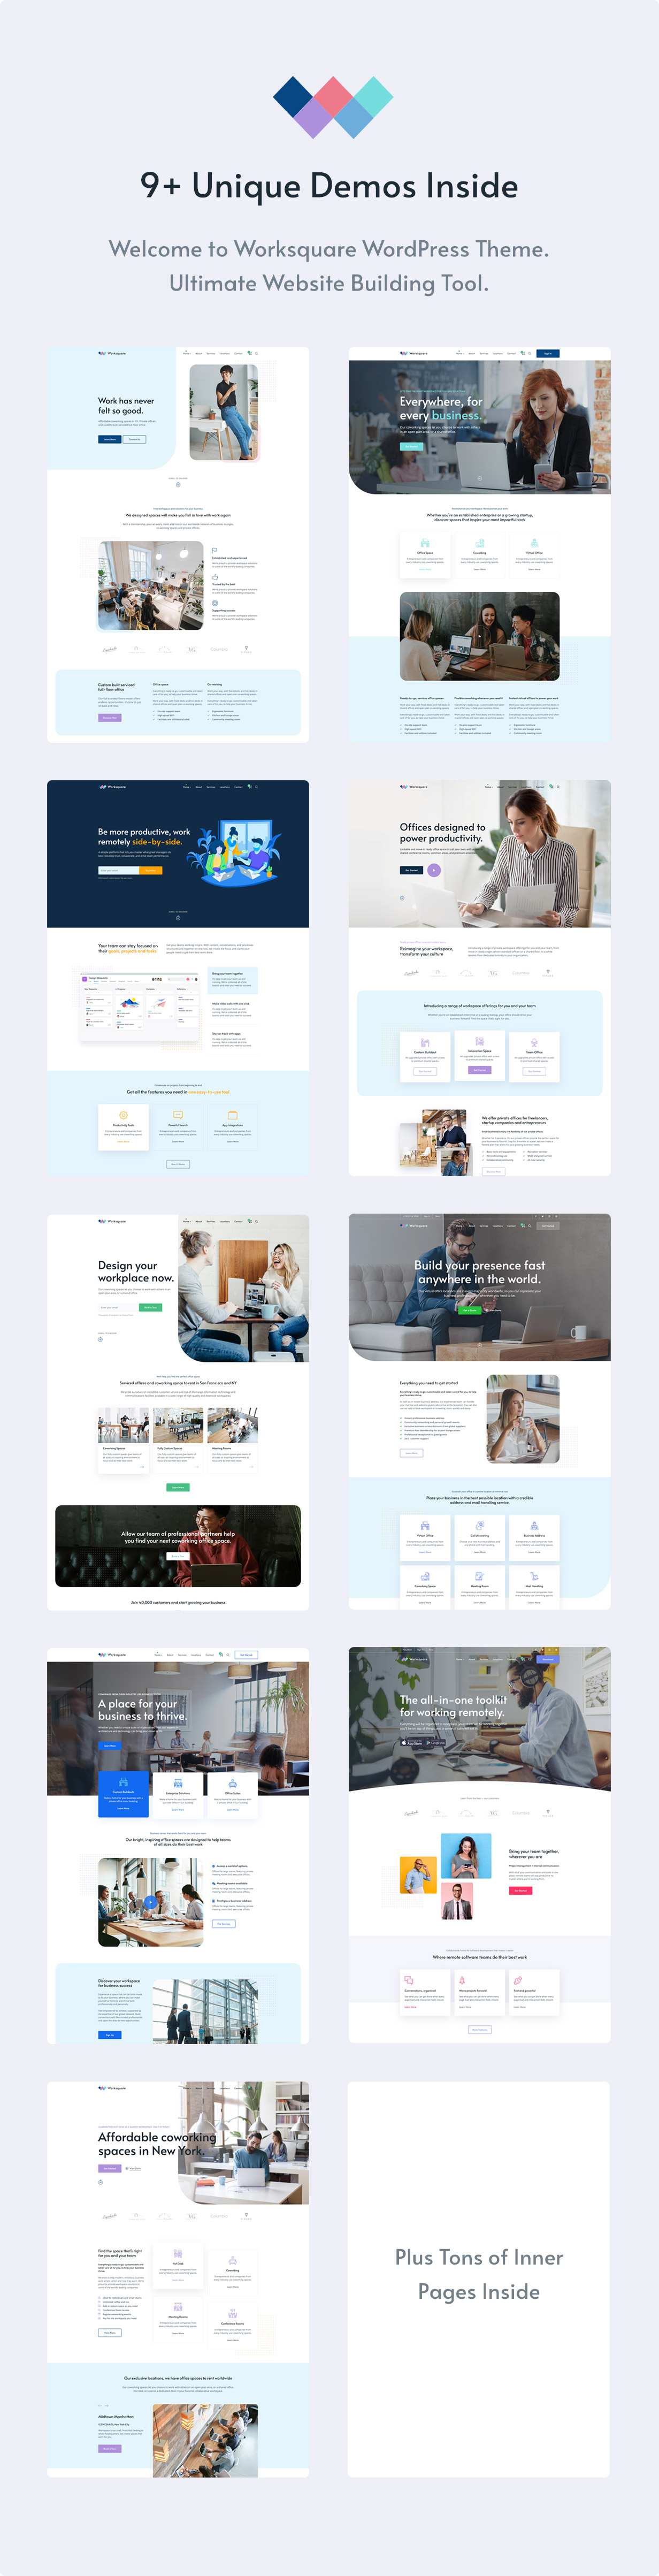 Worksquare - Coworking and Office Space WordPress Theme - 4